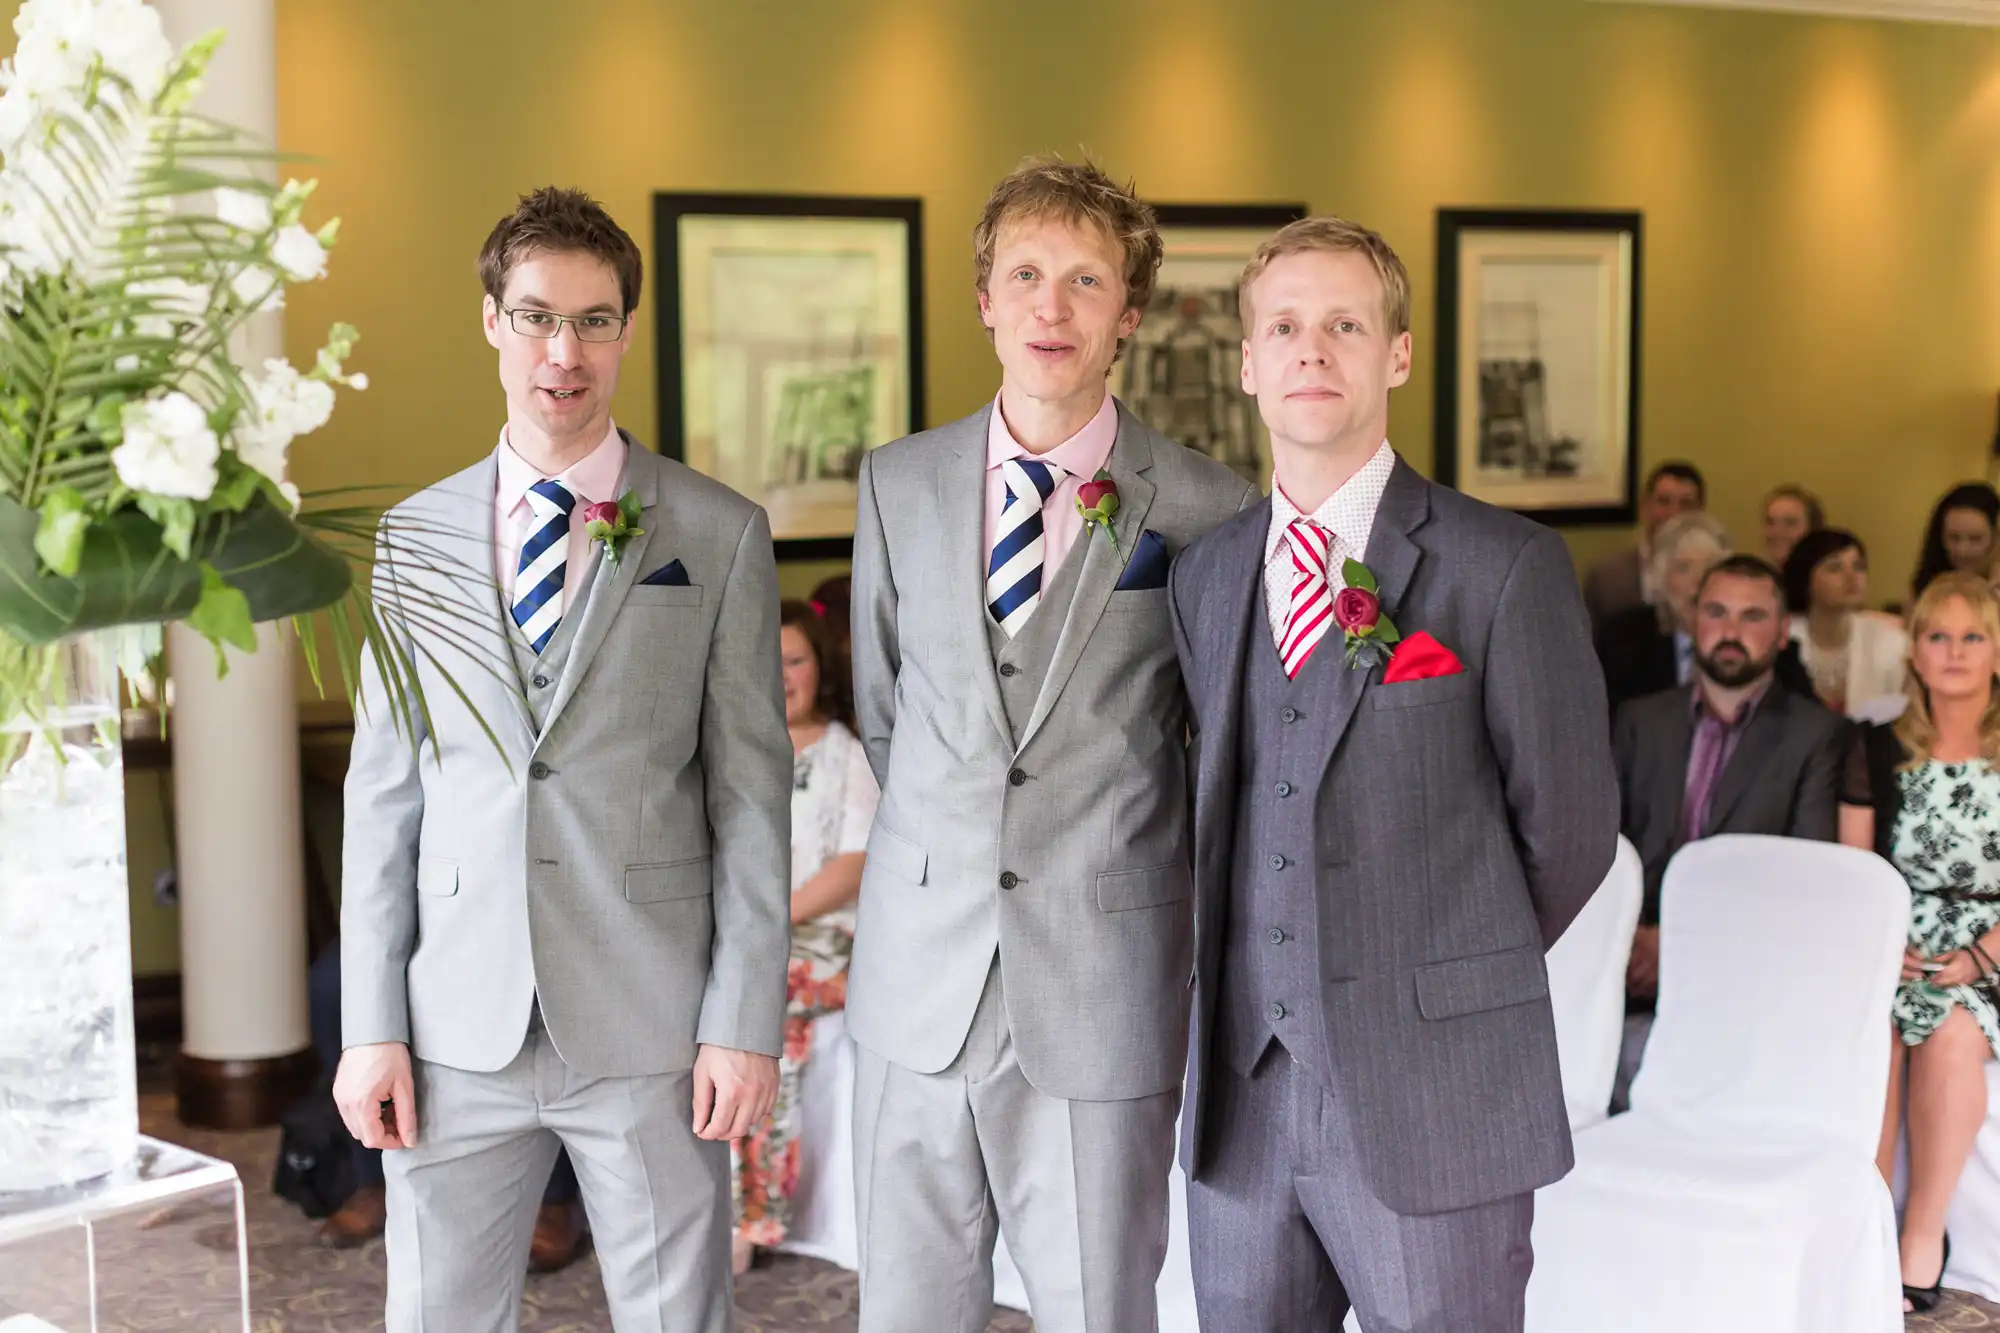 Three men in suits at a wedding ceremony, standing in front of seated guests, each wearing a different colored tie and boutonniere.